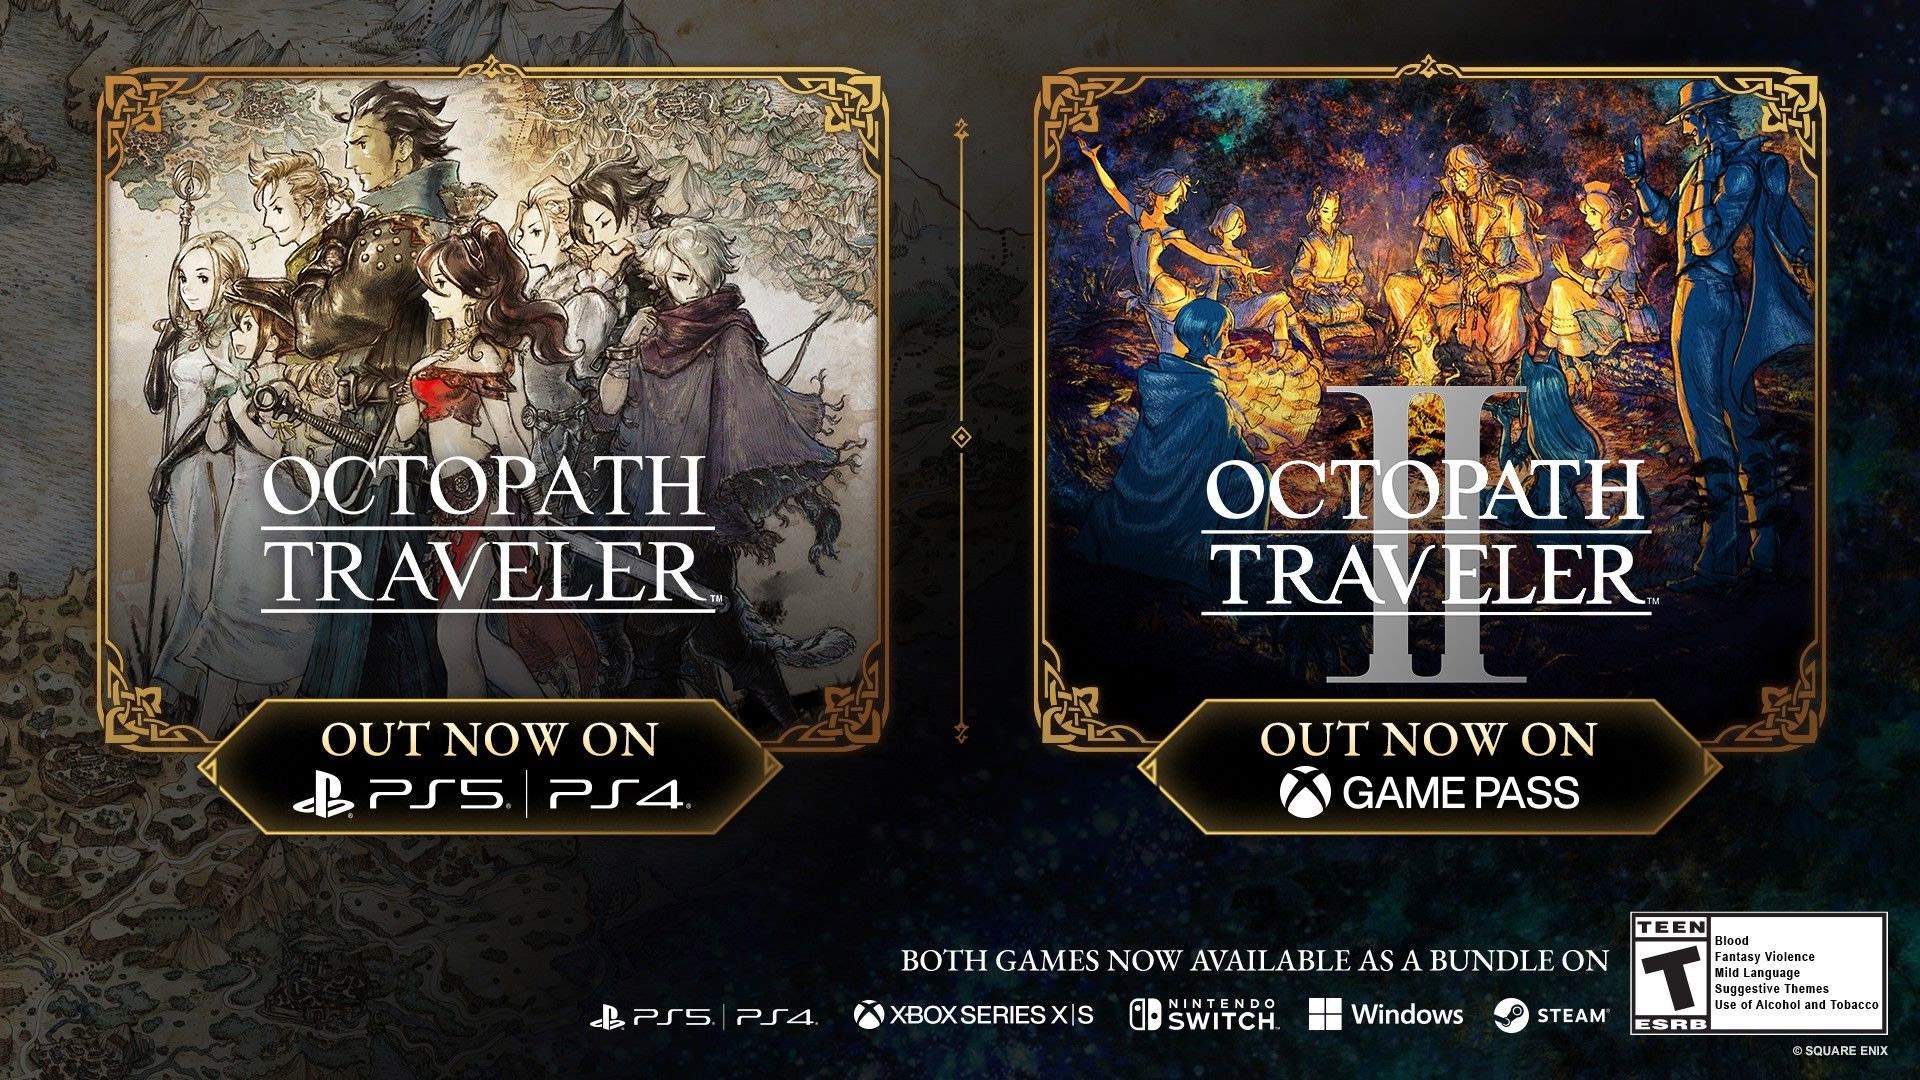 Beautyshot with OCTOPATH TRAVELER I out now on PS5/PS4 and OCTOPATH TRAVELER II out now on Game Pass